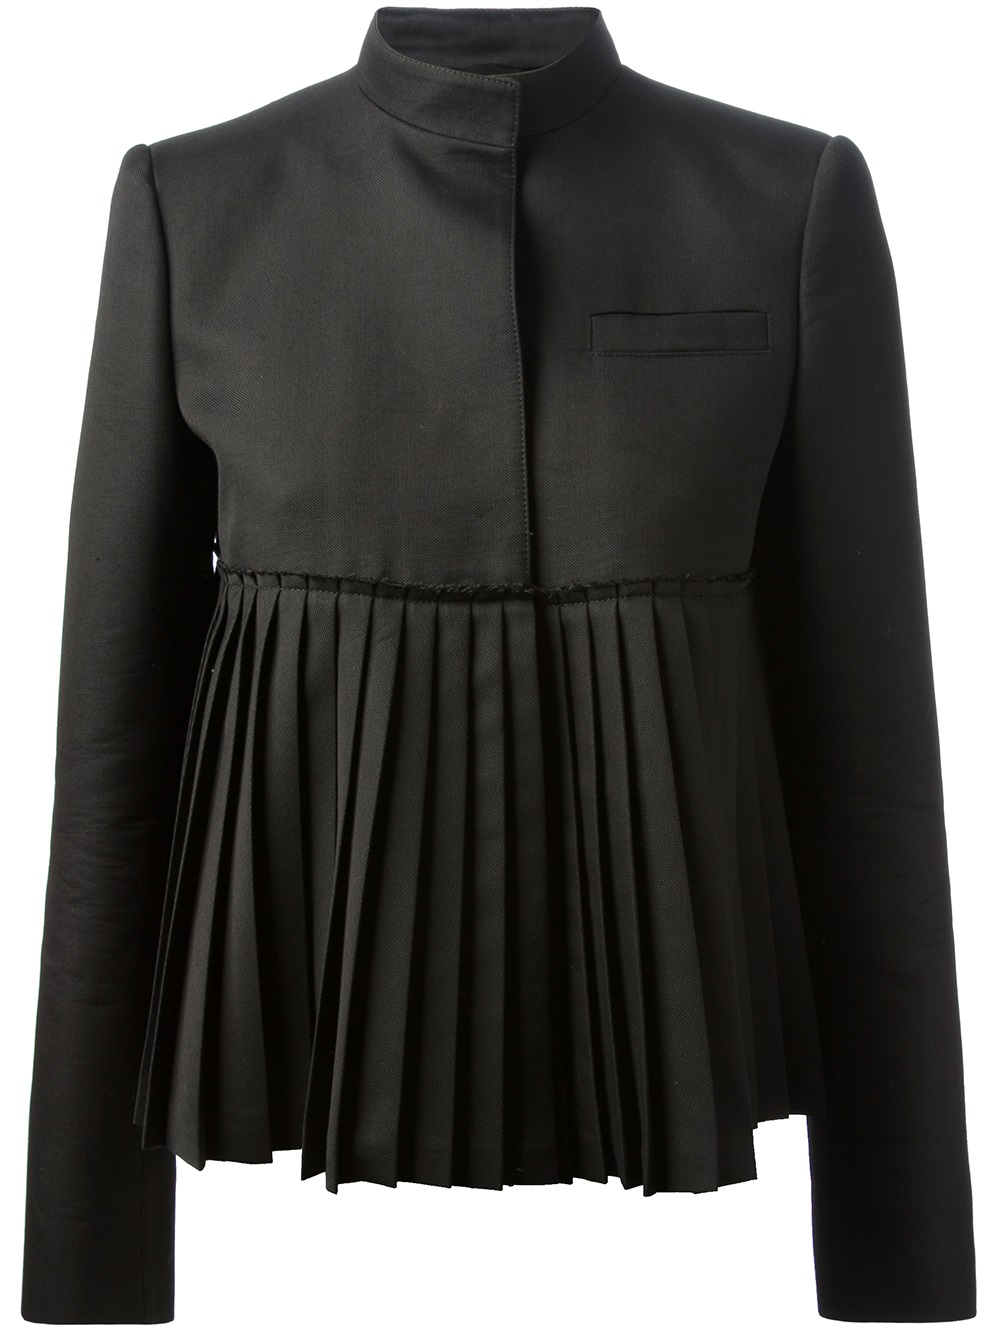 Lyst - Givenchy Pleated Jacket in Black